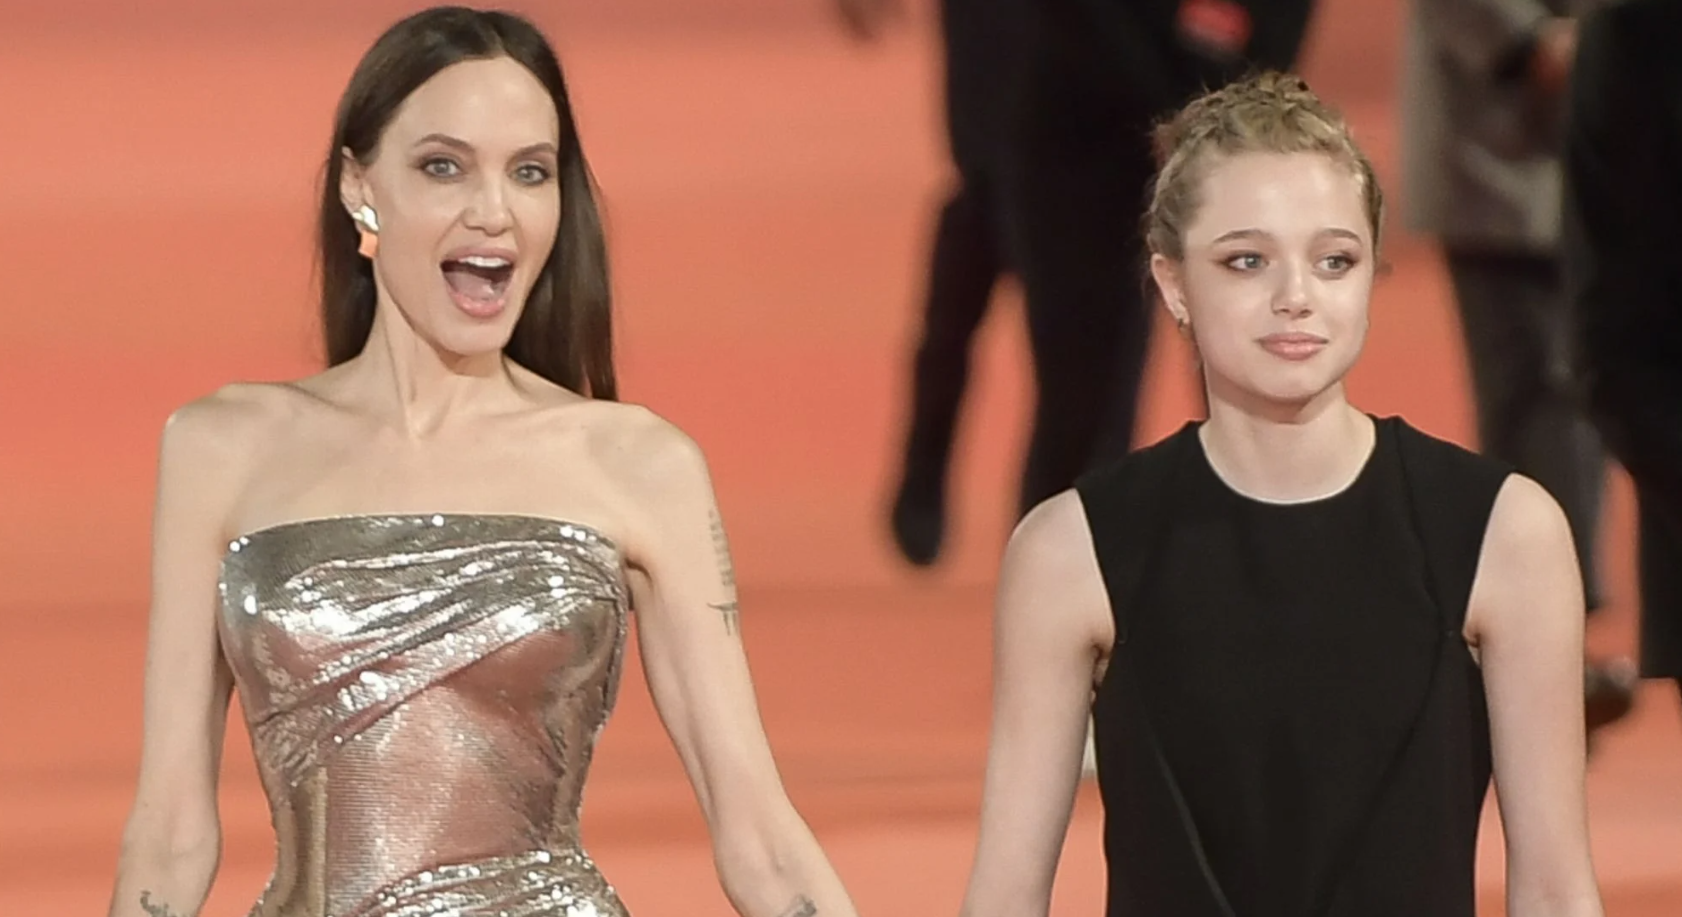 Shiloh Jolie-Pitt: for her 18th birthday, Angelina Jolie and Brad Pitt's daughter completely cuts ties with her father.